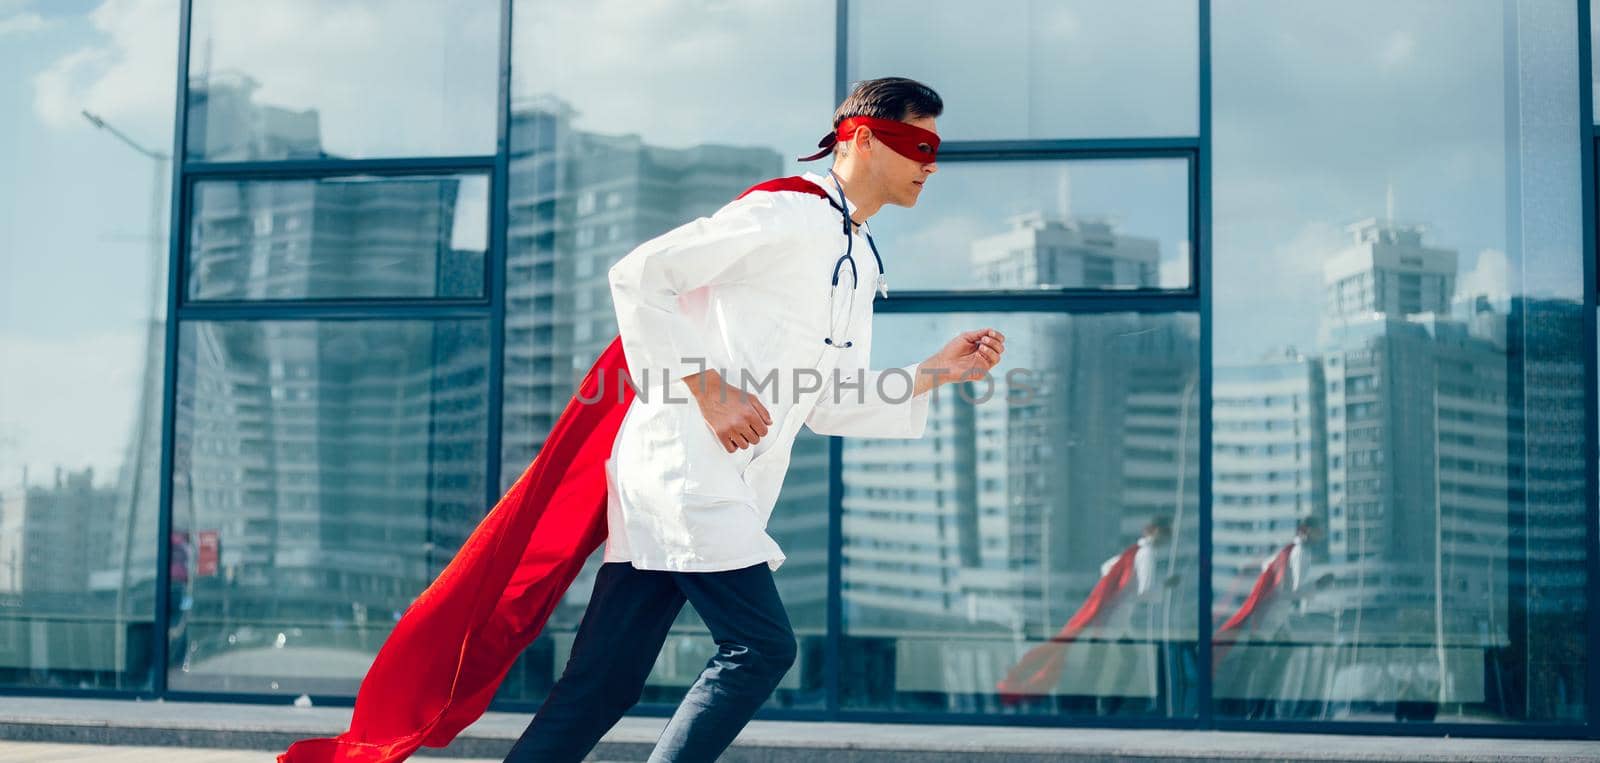 doctor is a superhero running through the city streets. photo with a copy-space.